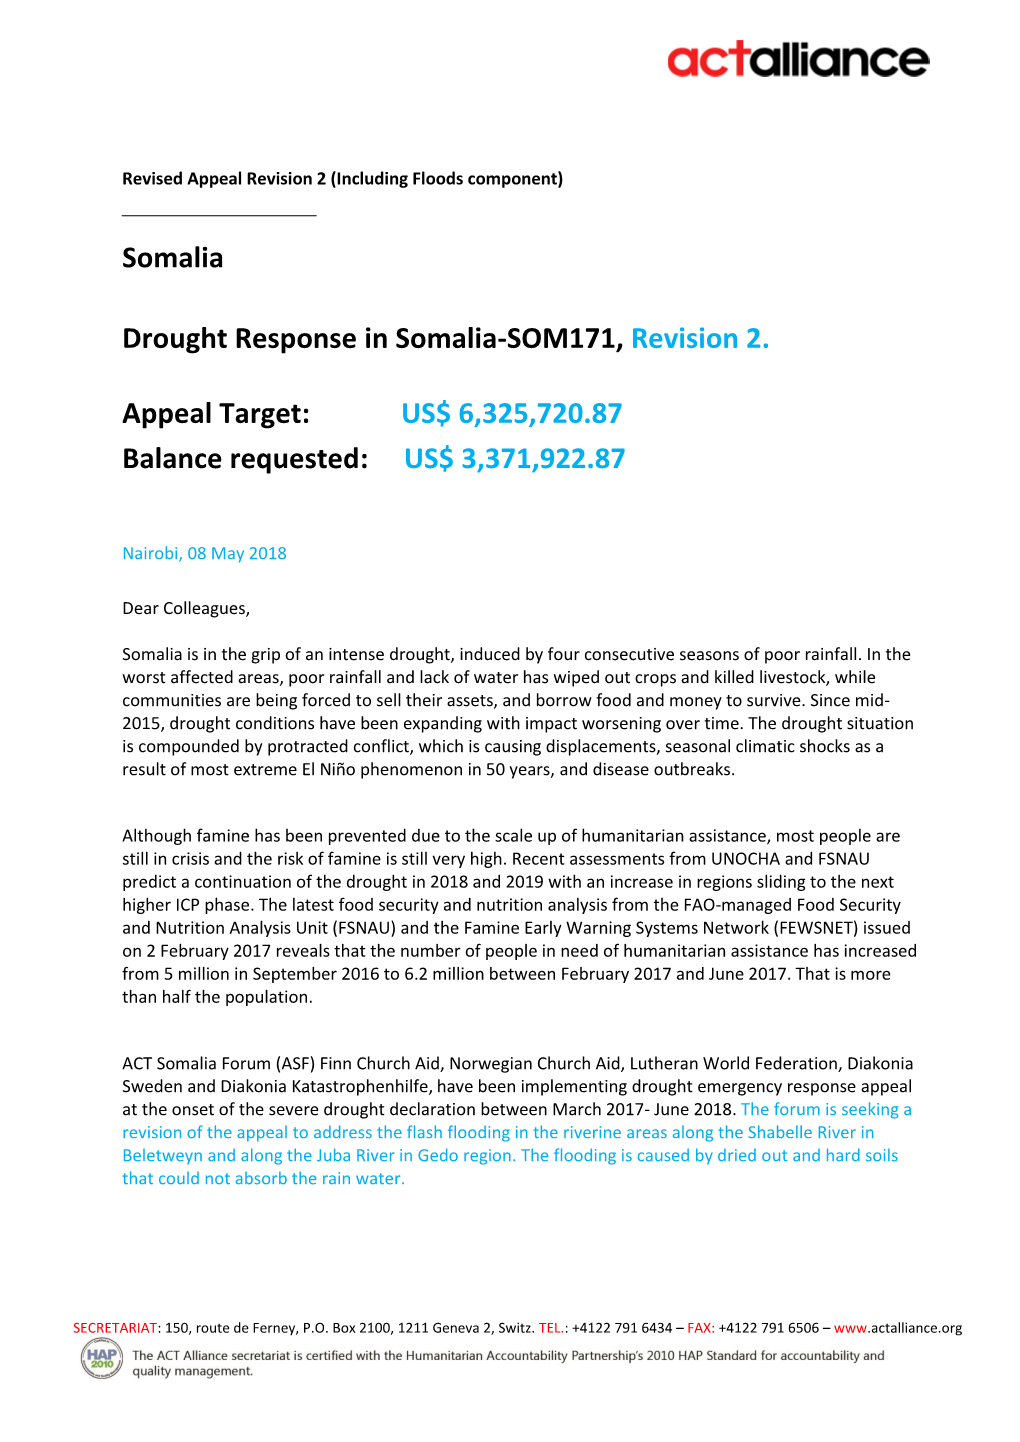 SOMALIA-Drought and Flood Response Appeal SOM171